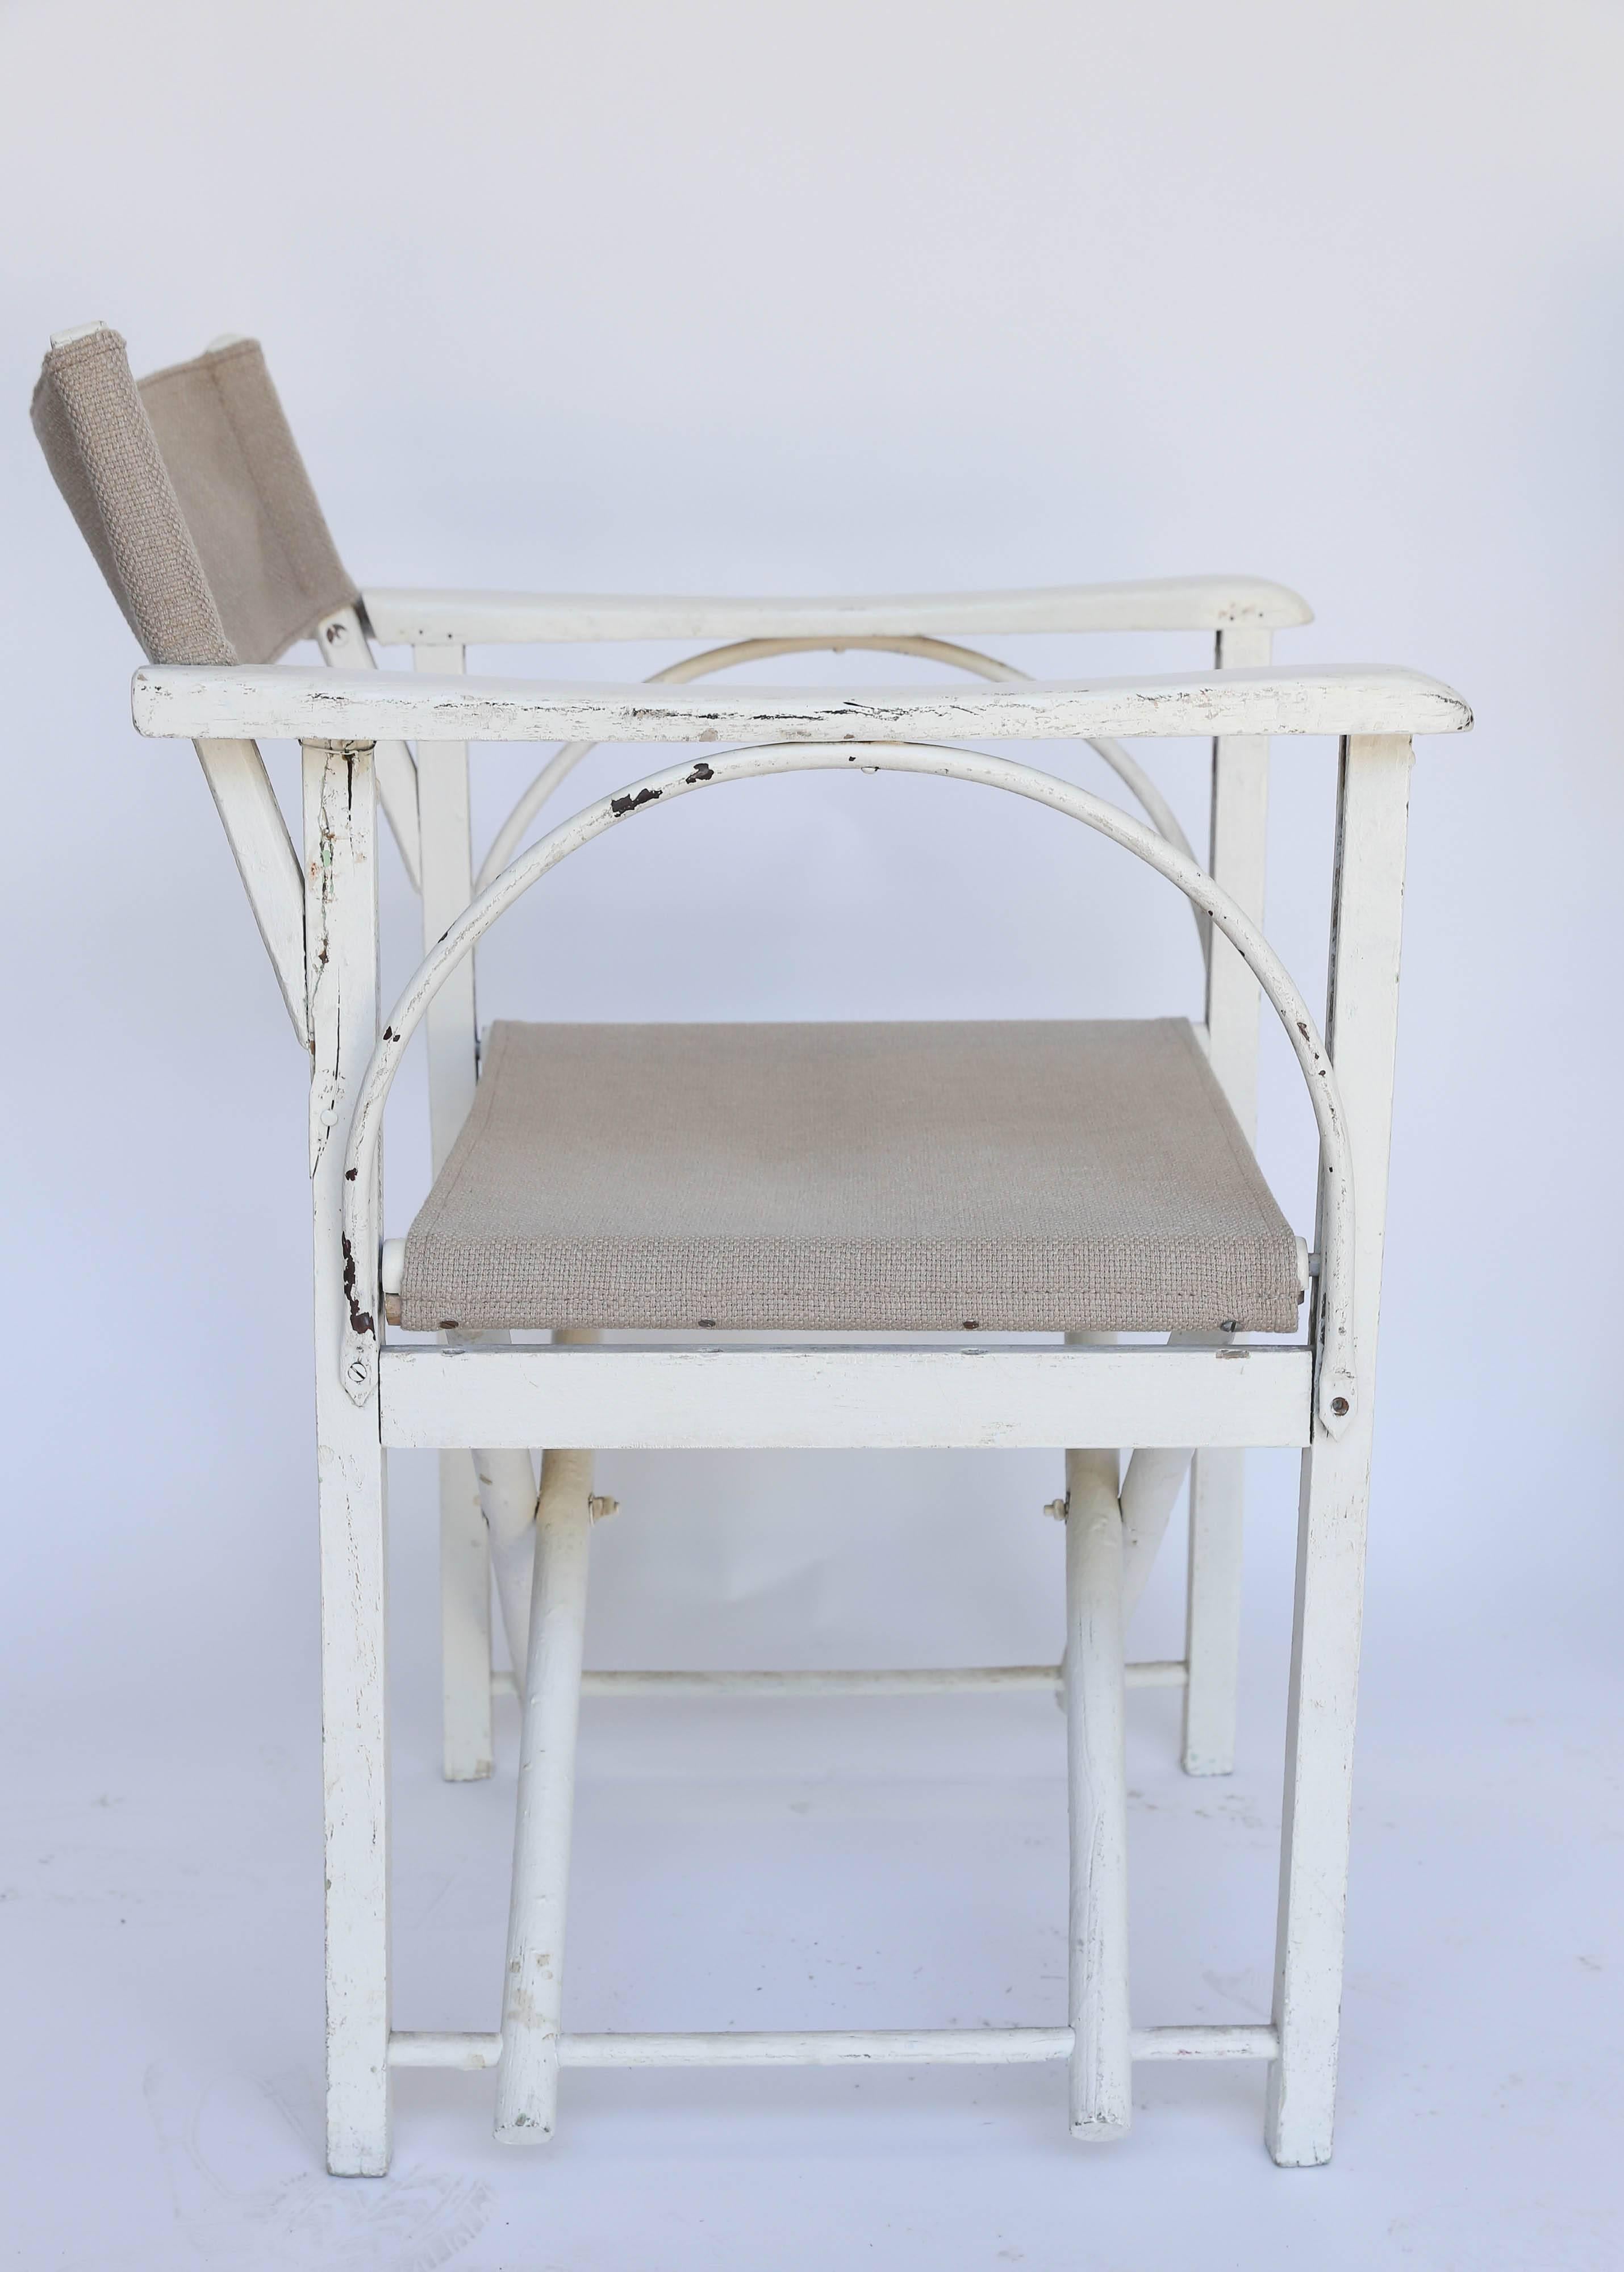 Wonderful proportions on a pair of folding chairs from France. White painted finish with new burlap-weave cotton/poly blend upholstery. An arched metal rod adds structural integrity as well as visual interest. The finish is heavier - but not